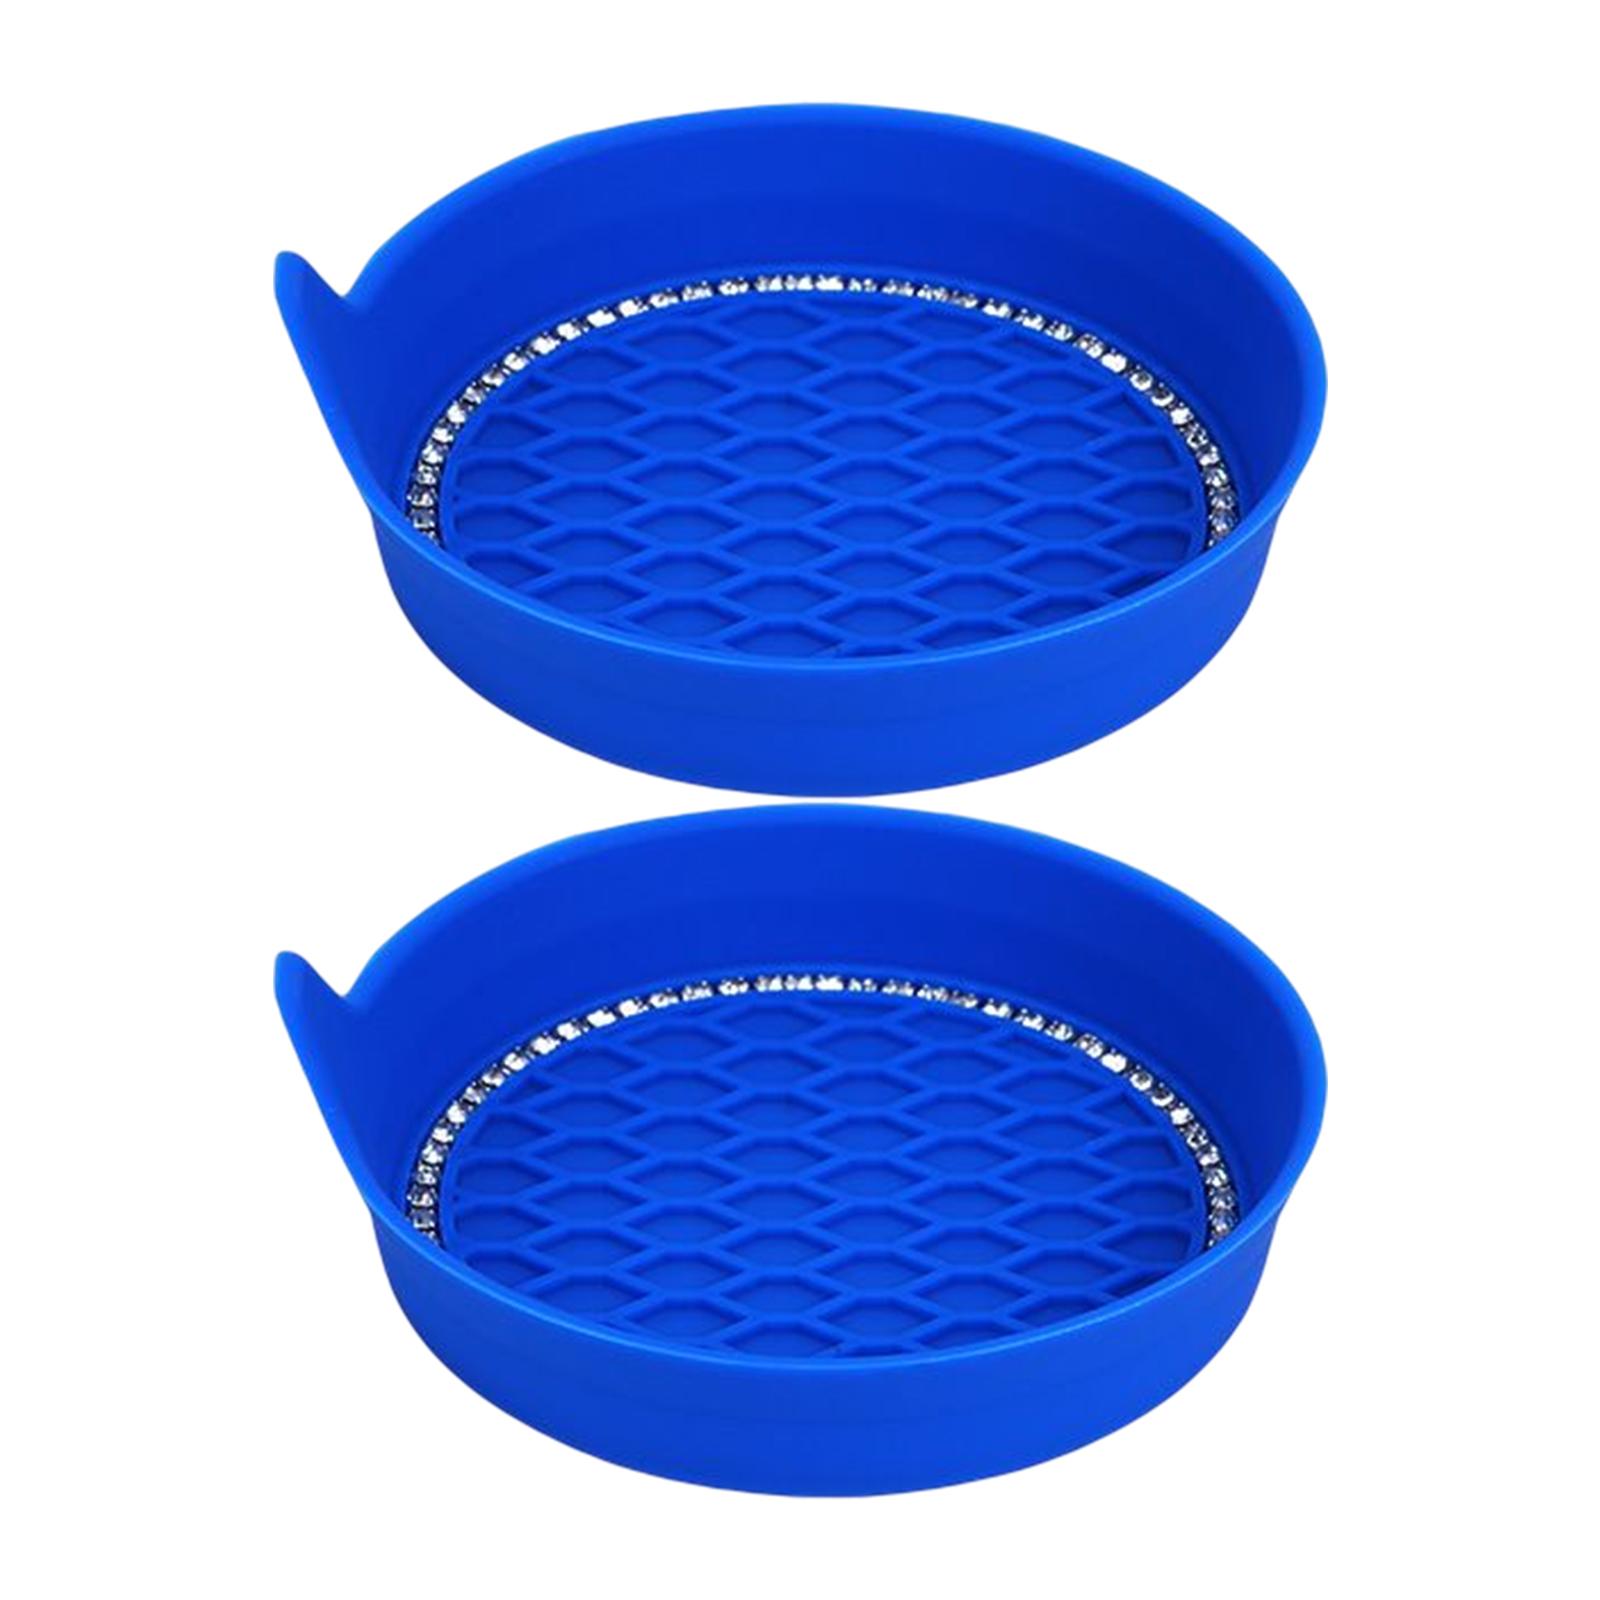 Auto Cup Insert Coaster round Vehicle Cup Mats for Party Office RV Blue